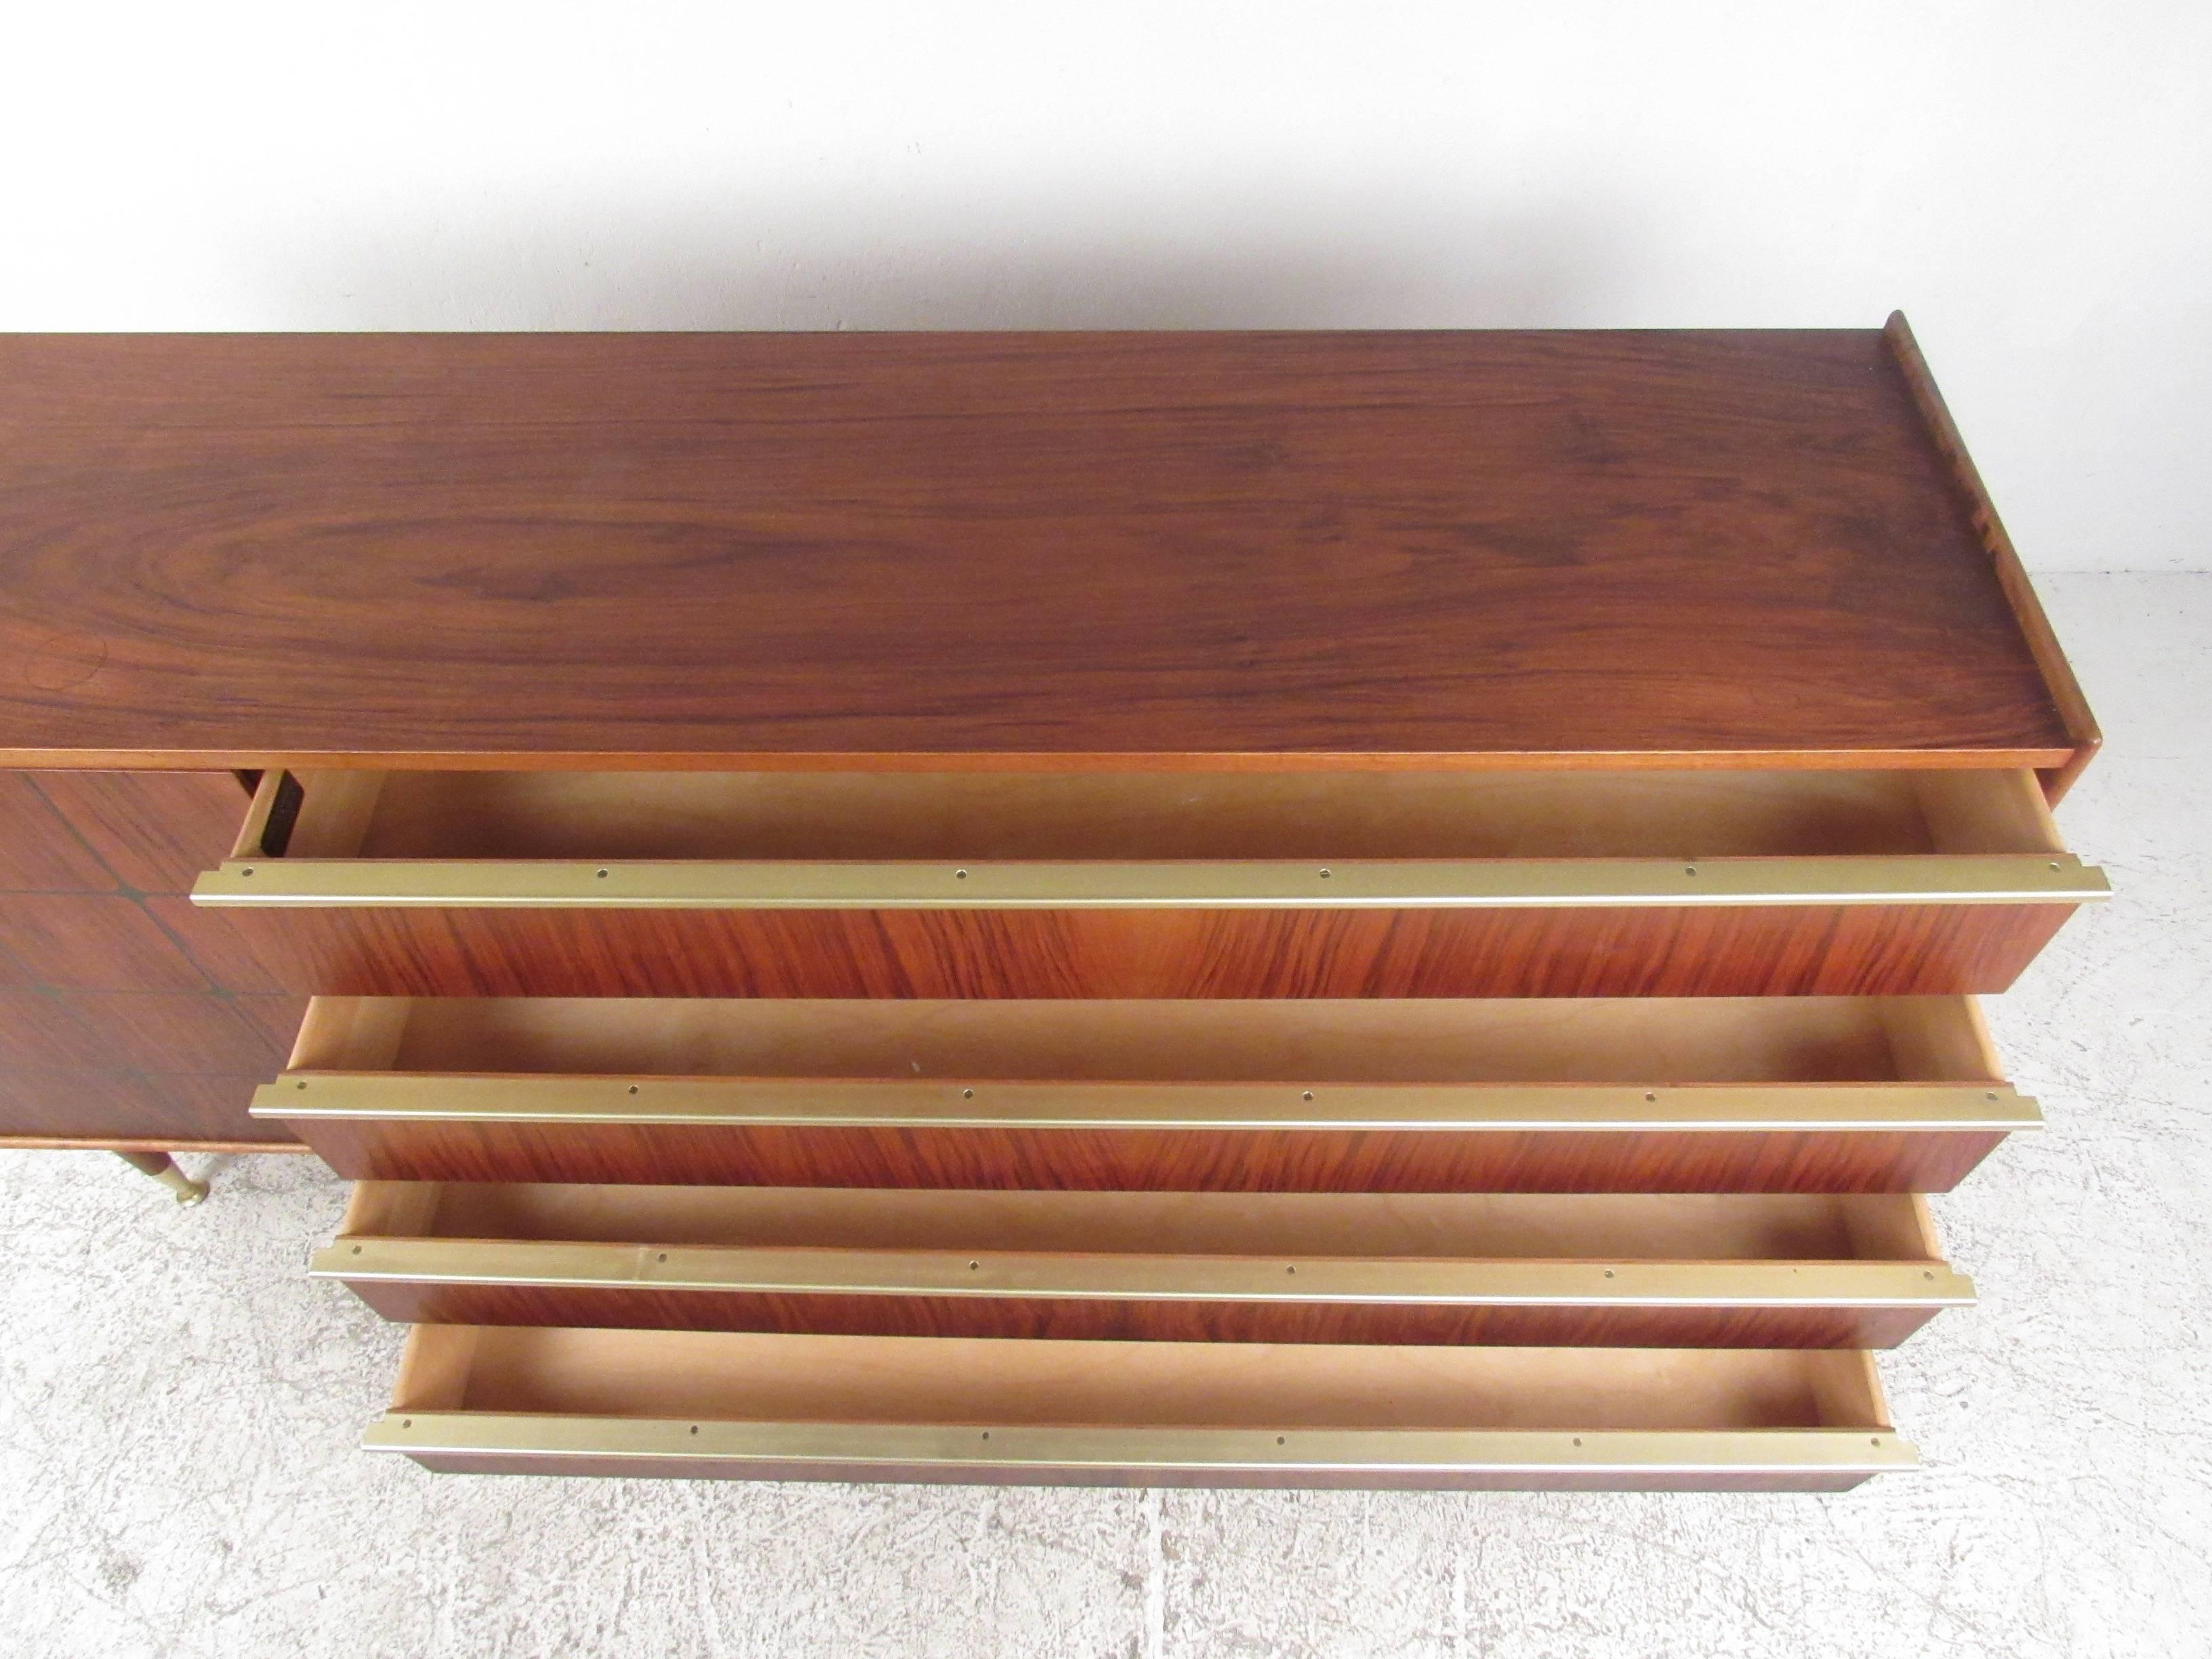 20th Century Edmond Spence Mid-Century Sideboard with Inlays and Raised Edges For Sale